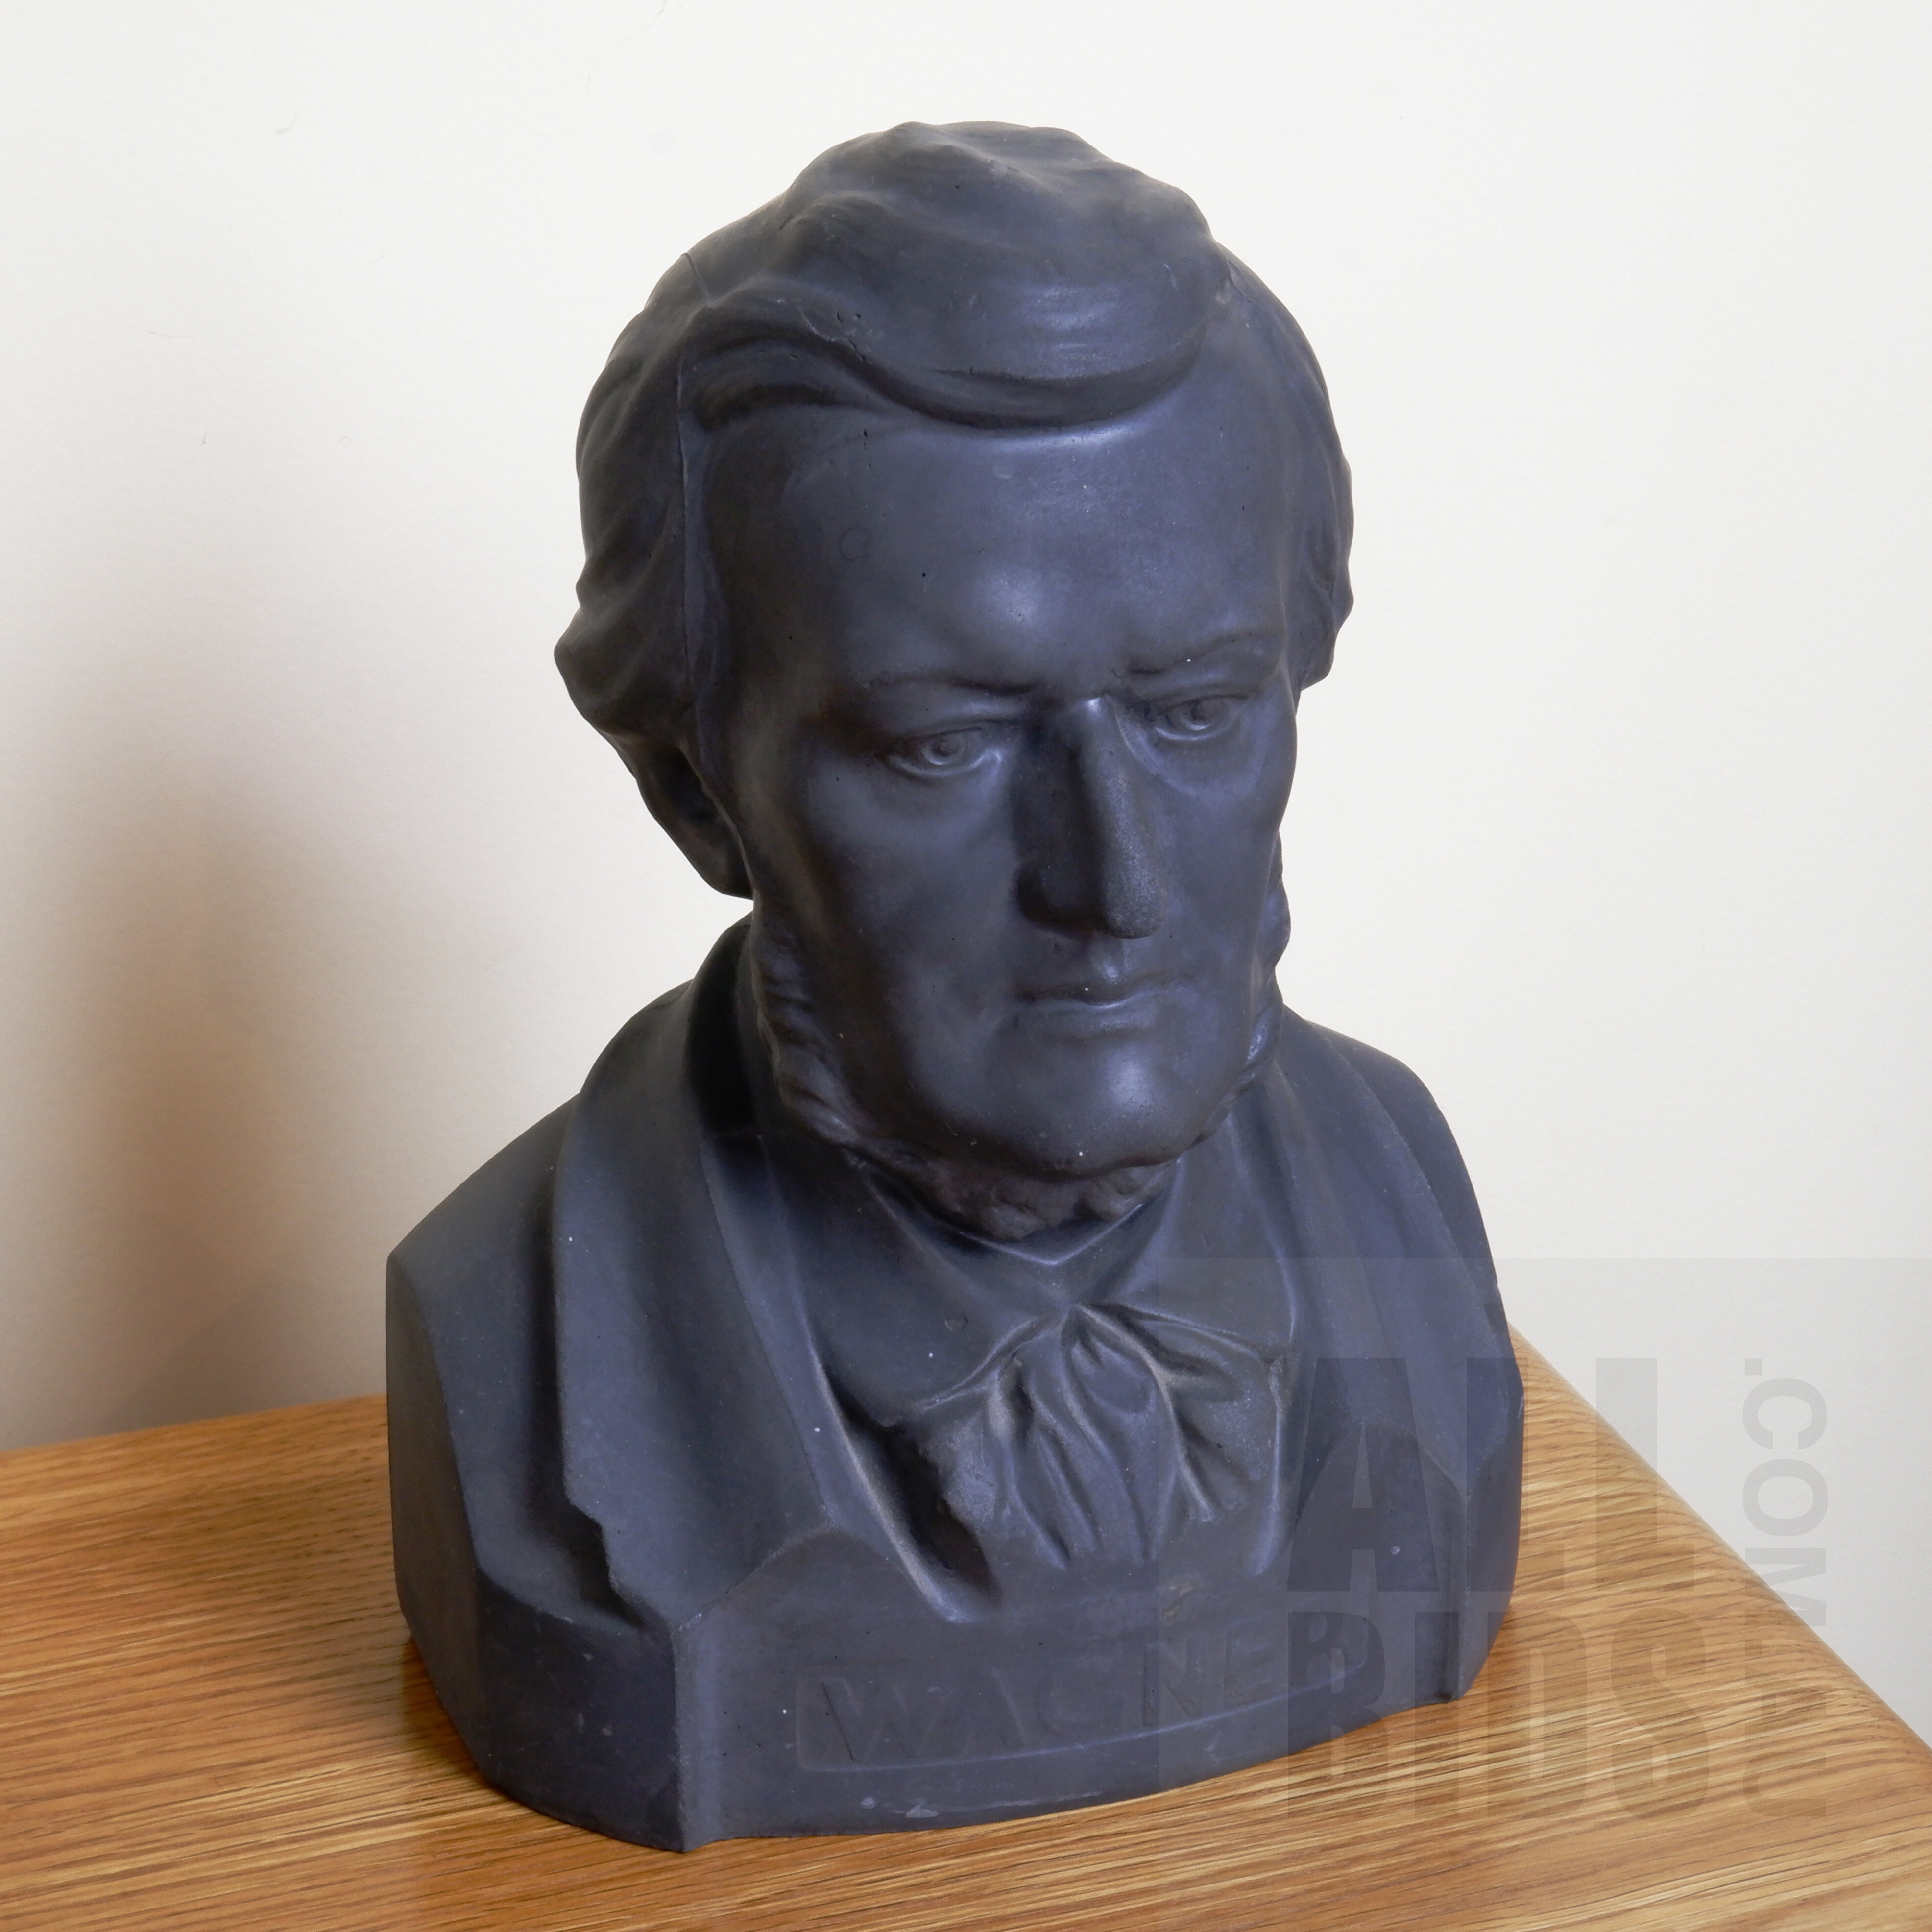 'Ceramic Bust of Wagner'